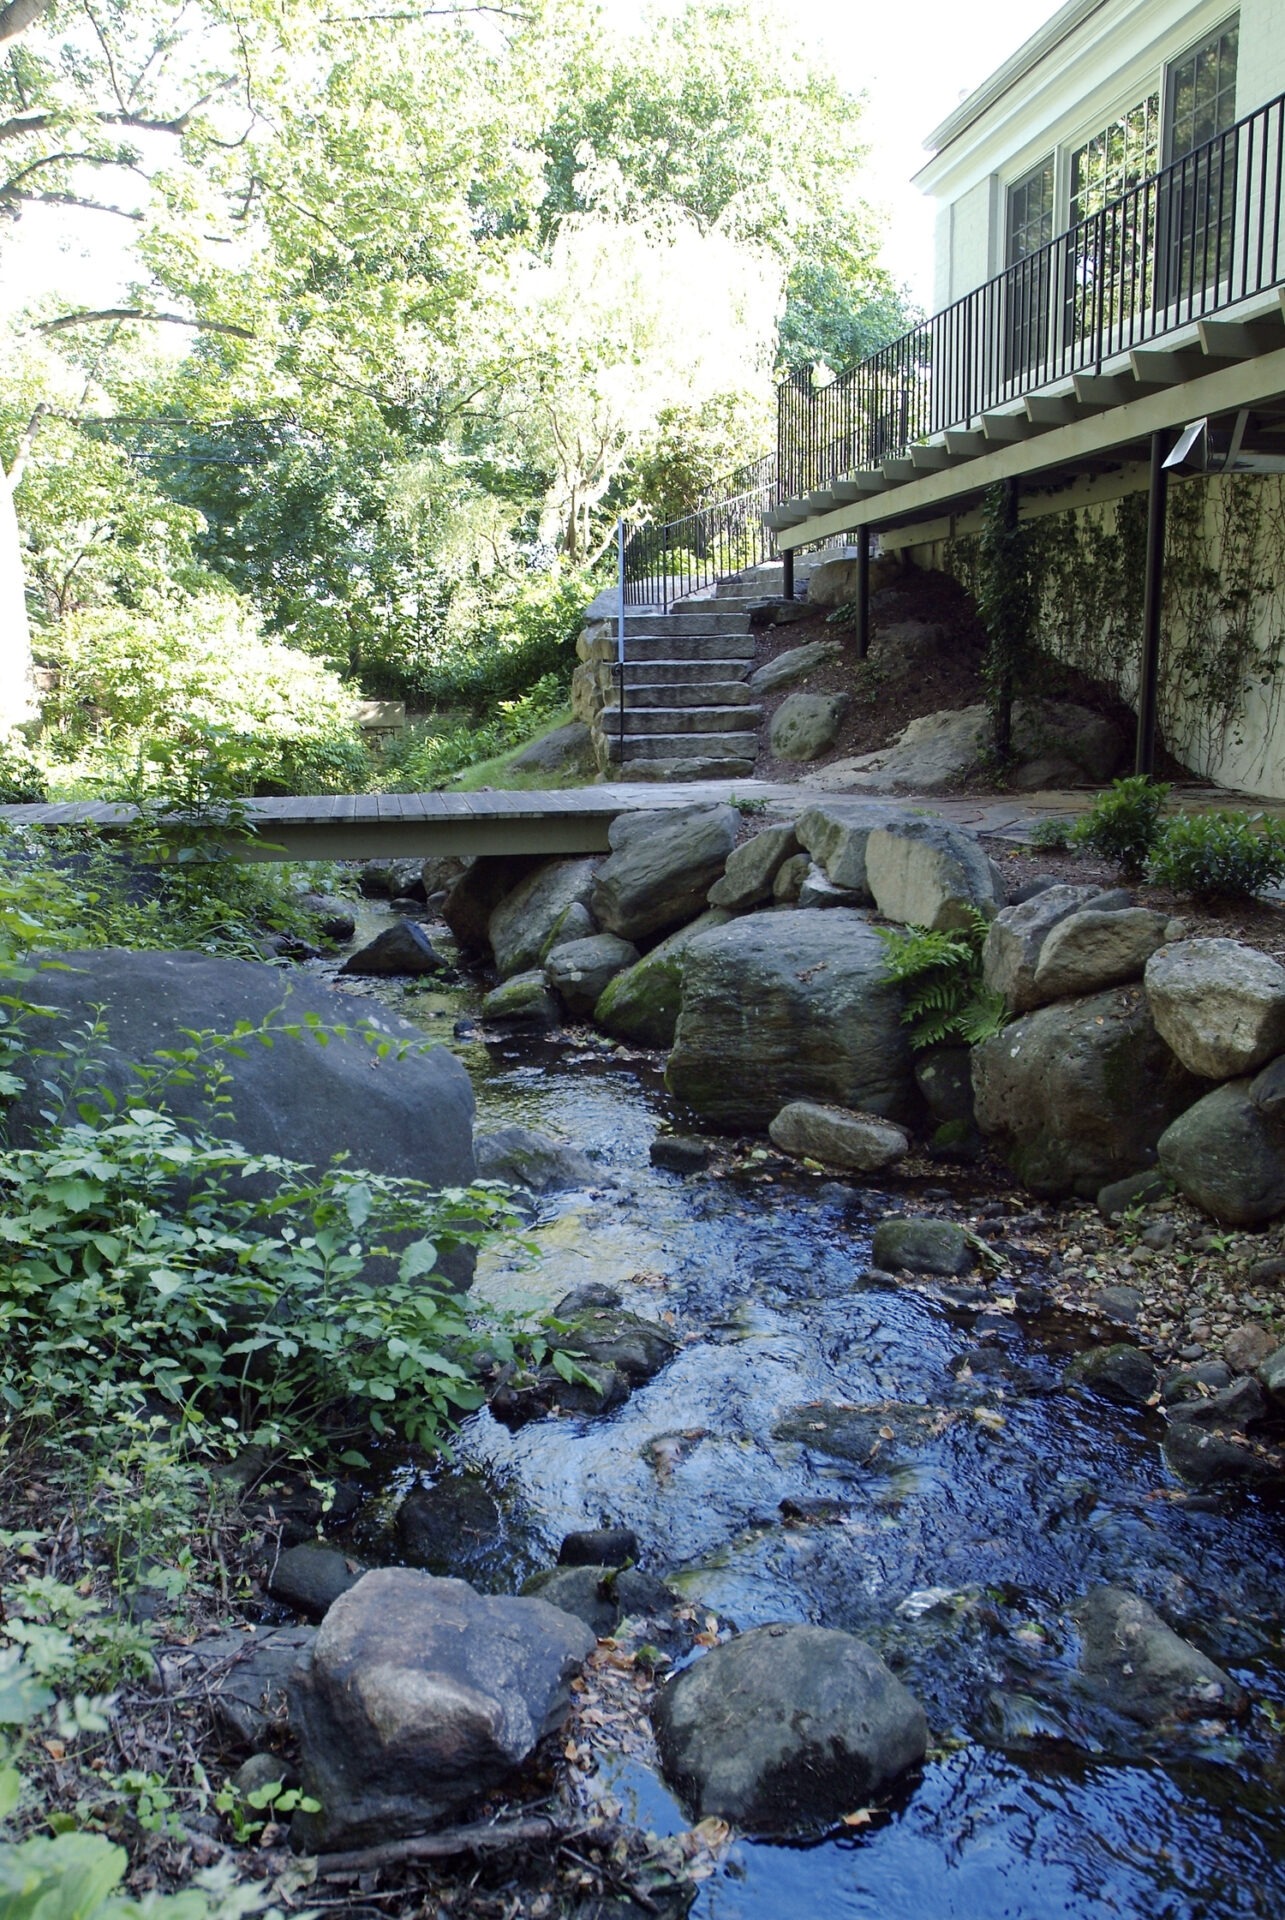 A serene stream flows between rocky banks beneath a wooden bridge, leading to stone steps by a building with a balcony amidst lush greenery.